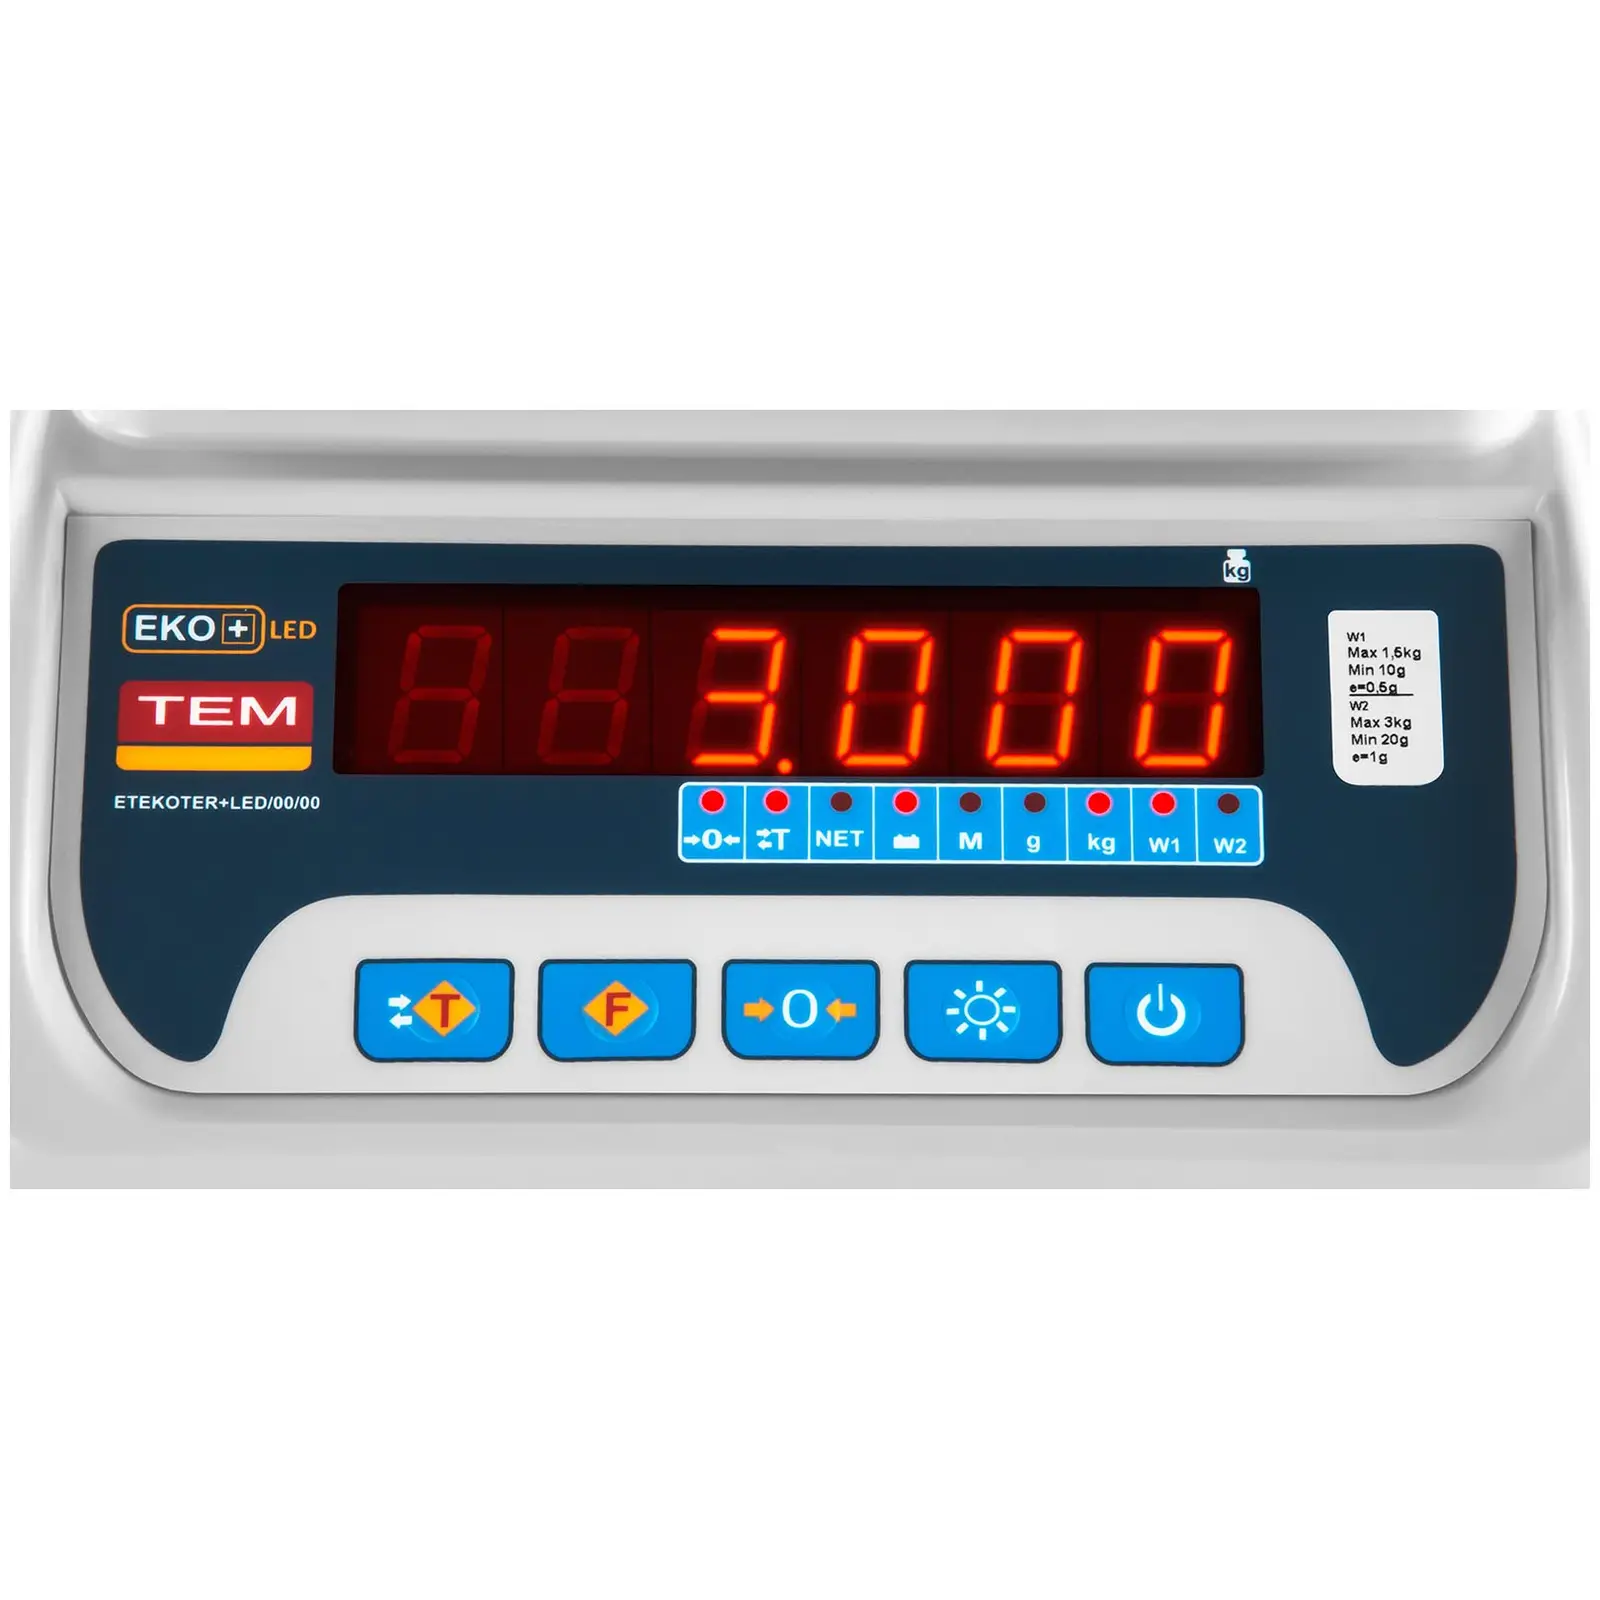 Table Scale - calibrated - 1.5 kg / 0.5 g - 3 kg / 1 g - LED